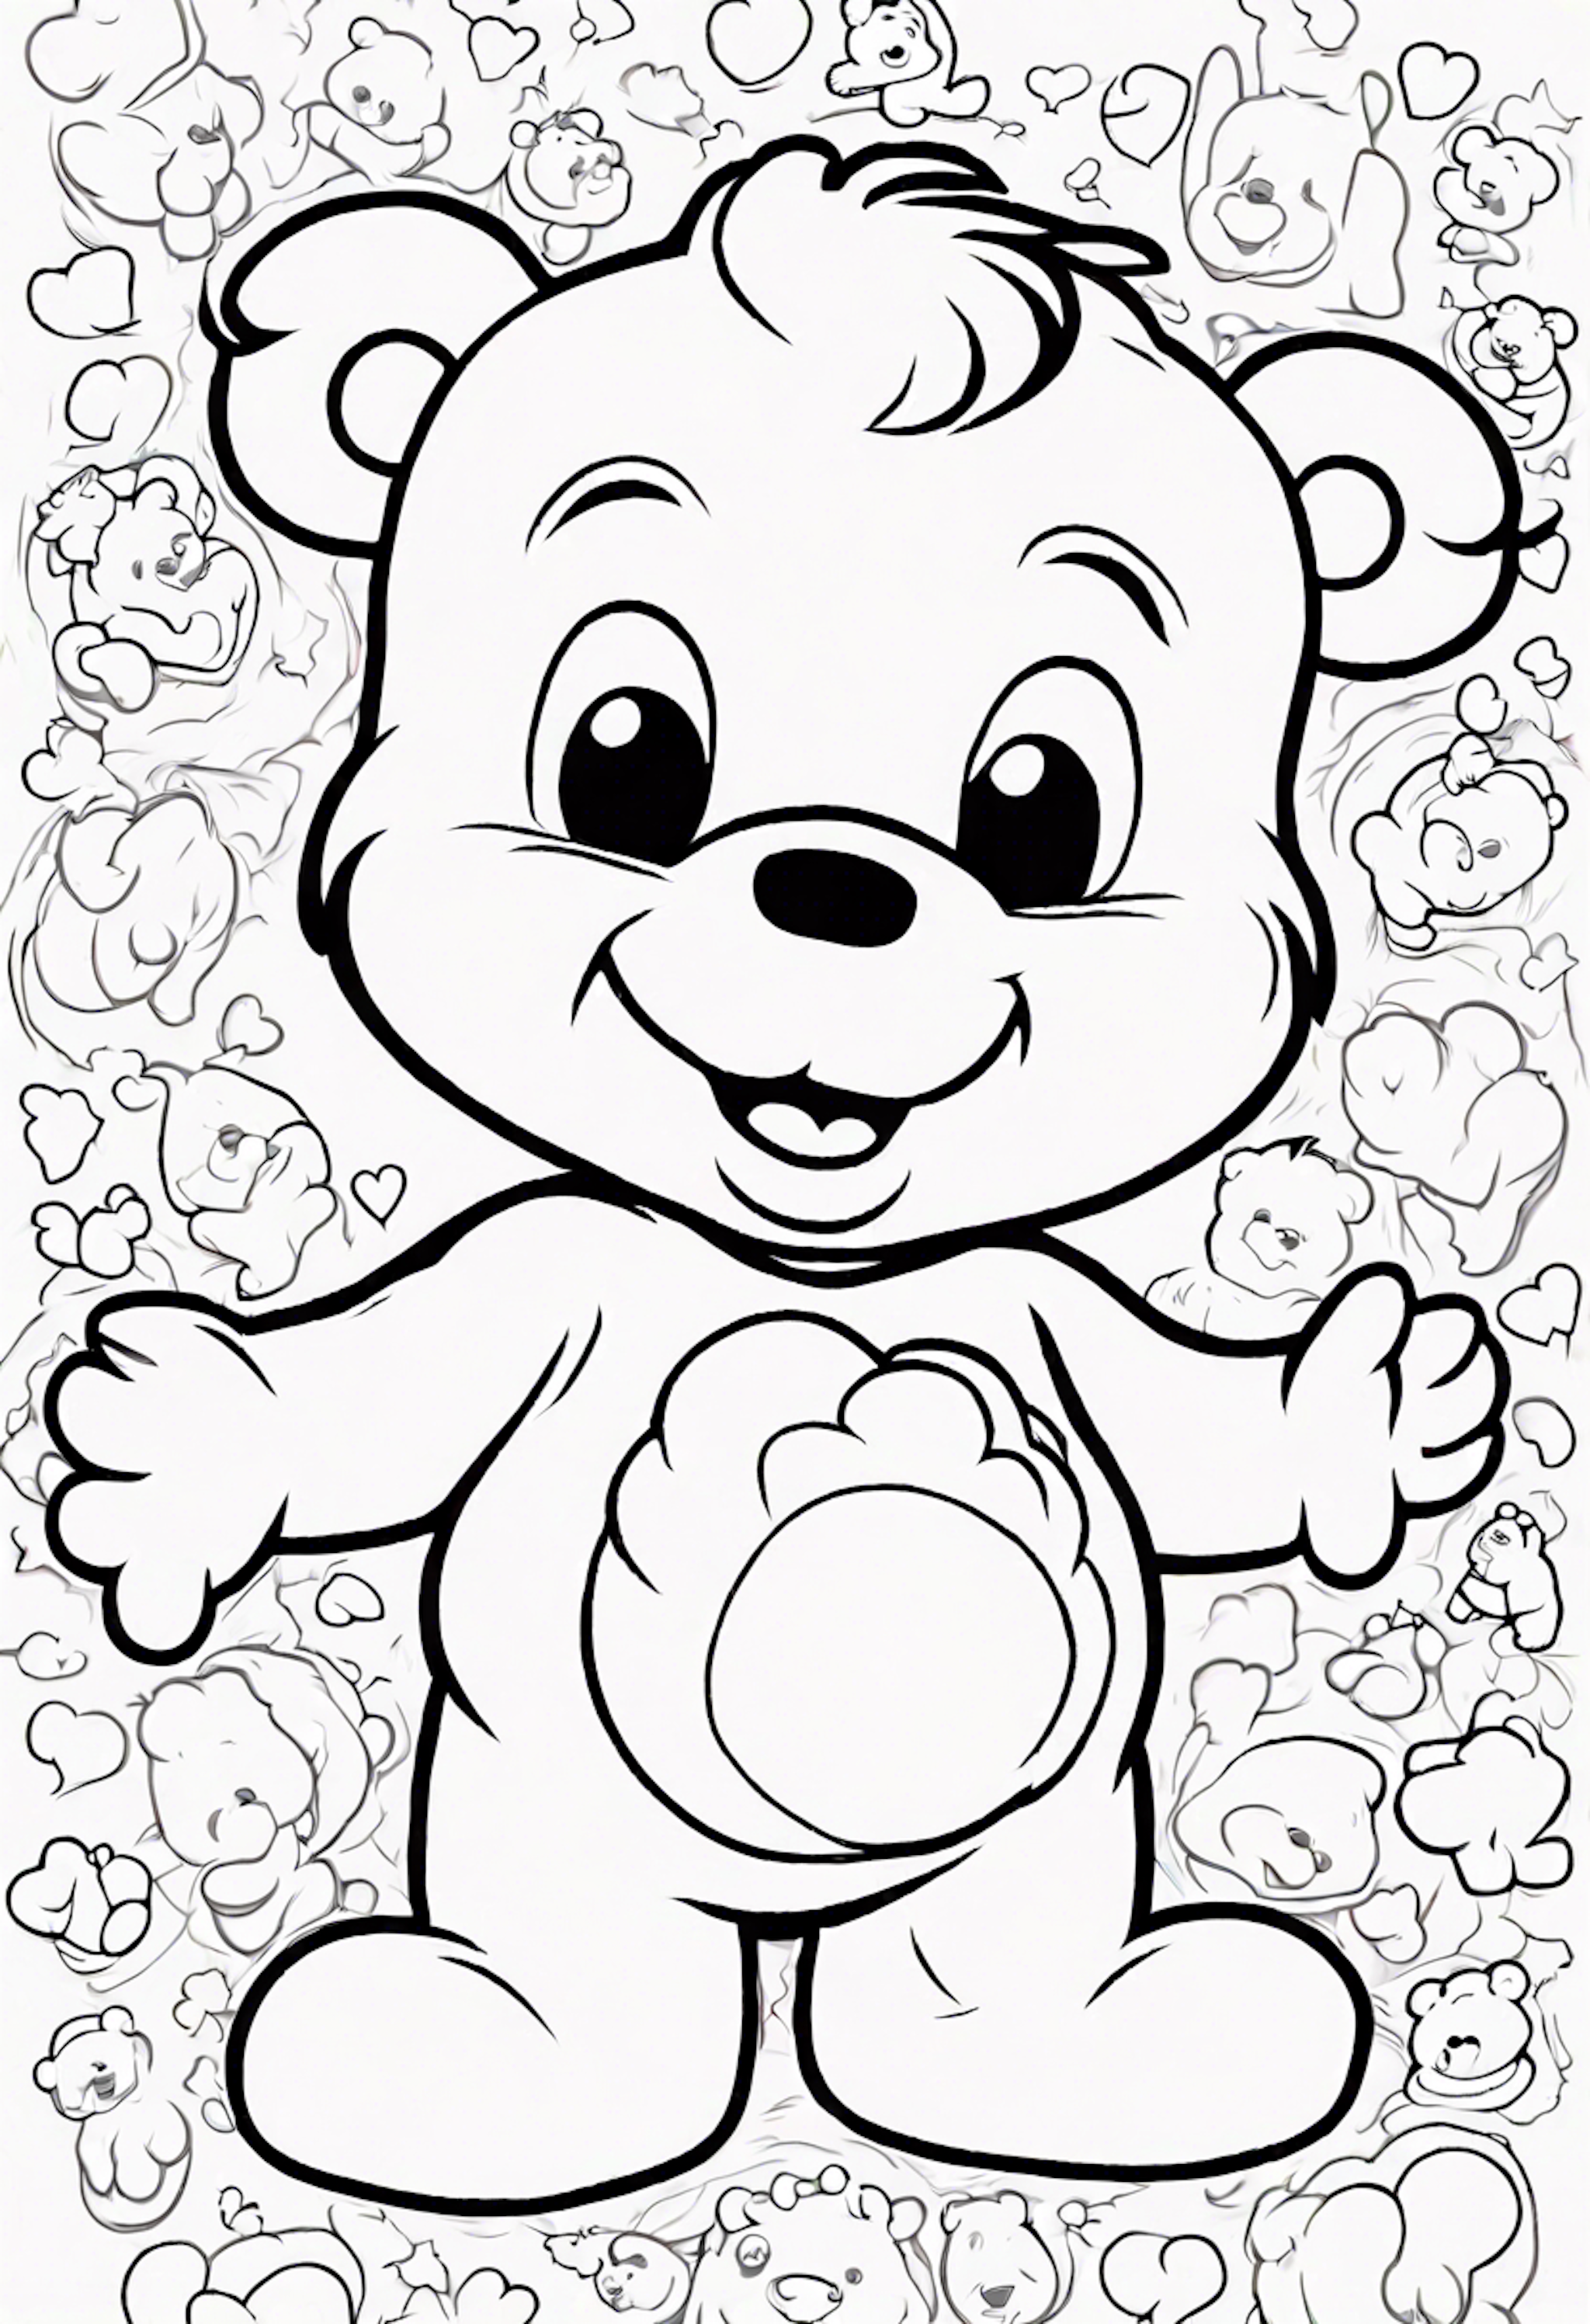 A coloring page for 1 Care Bears coloring pages